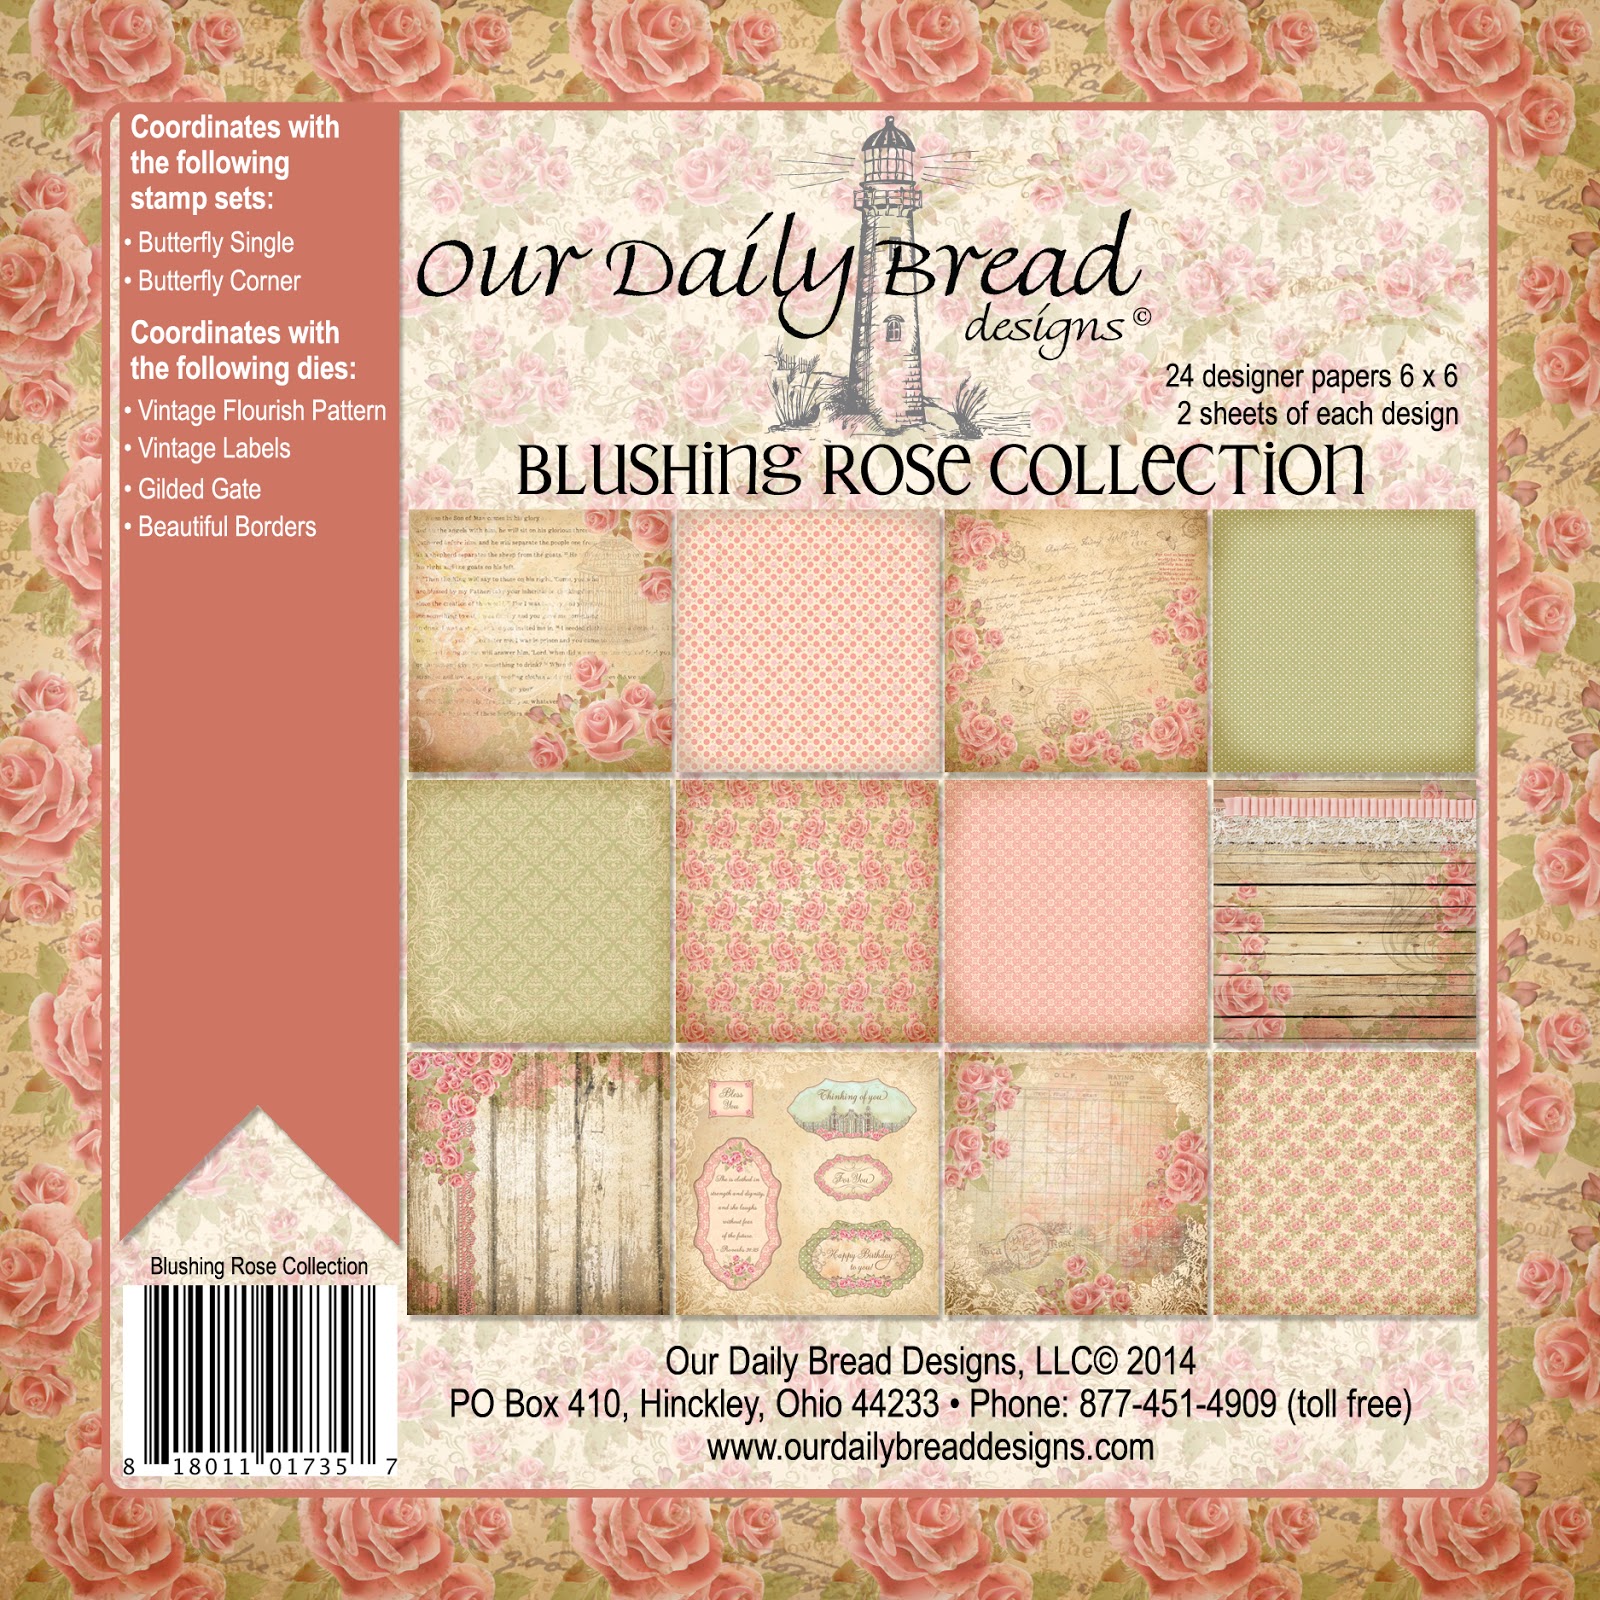 https://www.ourdailybreaddesigns.com/index.php/blushing-rose-collection-6x6-paper-pad.html